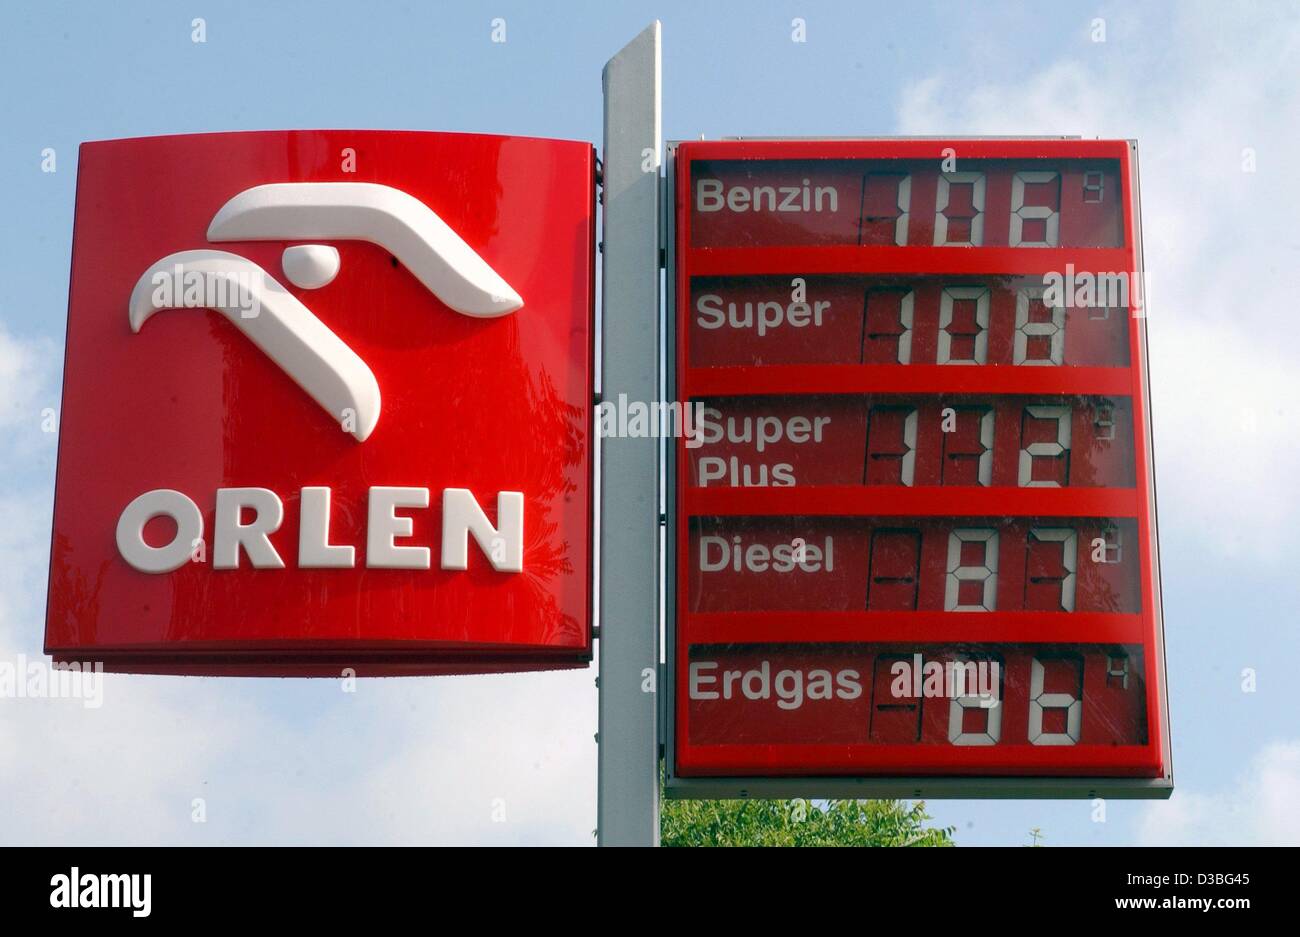 dpa) - The price board indicates the prices for petrol, super, super plus,  diesel and natural gas, which are about one cent below the average petrol  prices, at the first Orlen filling